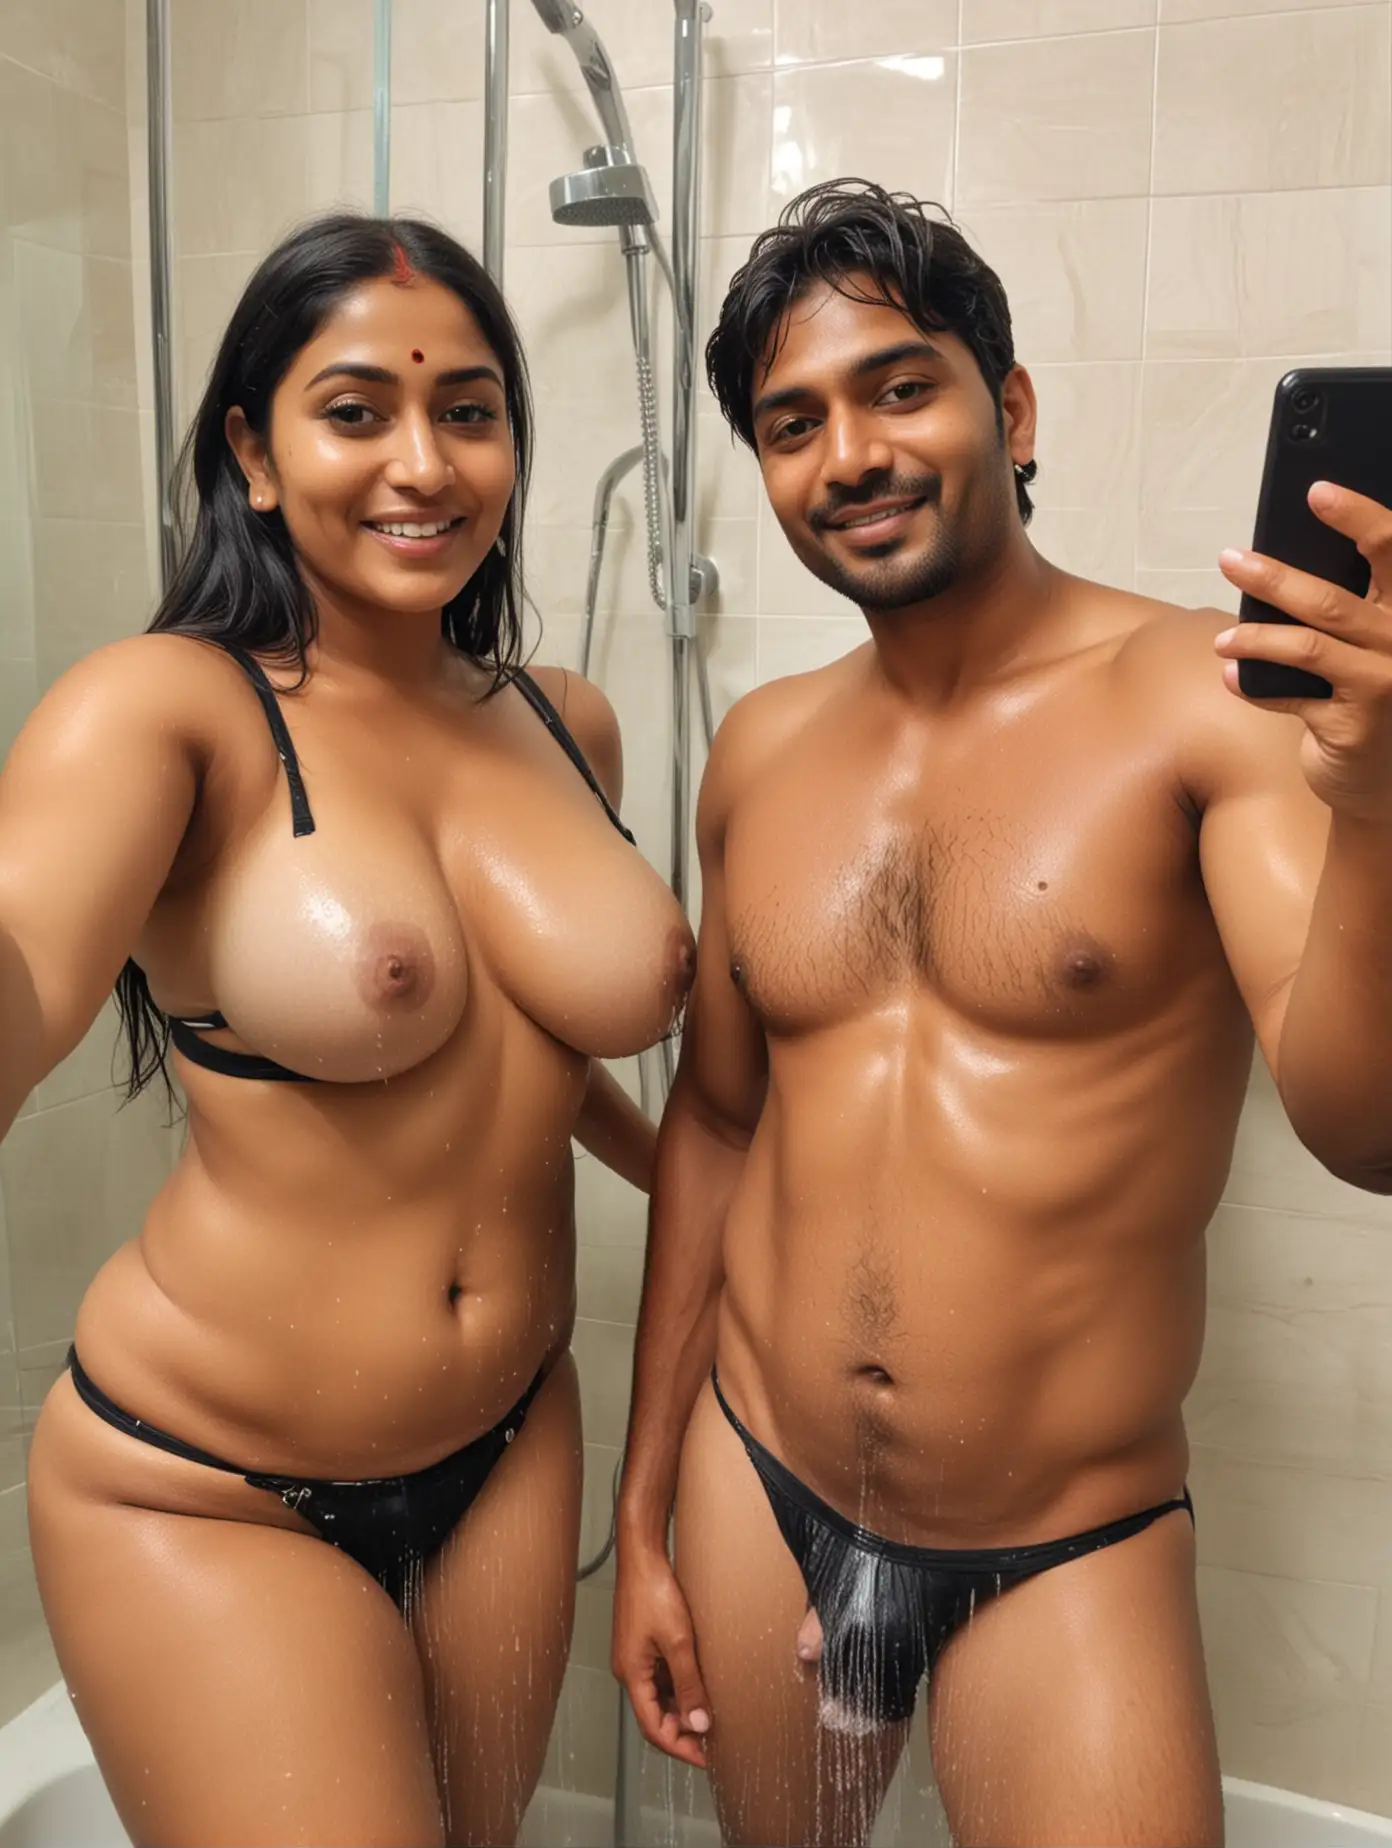 Generate image of a 40 year old very busty and curvy Indian woman and her male boyfriend taking shower and taking selfie with a mobile phone